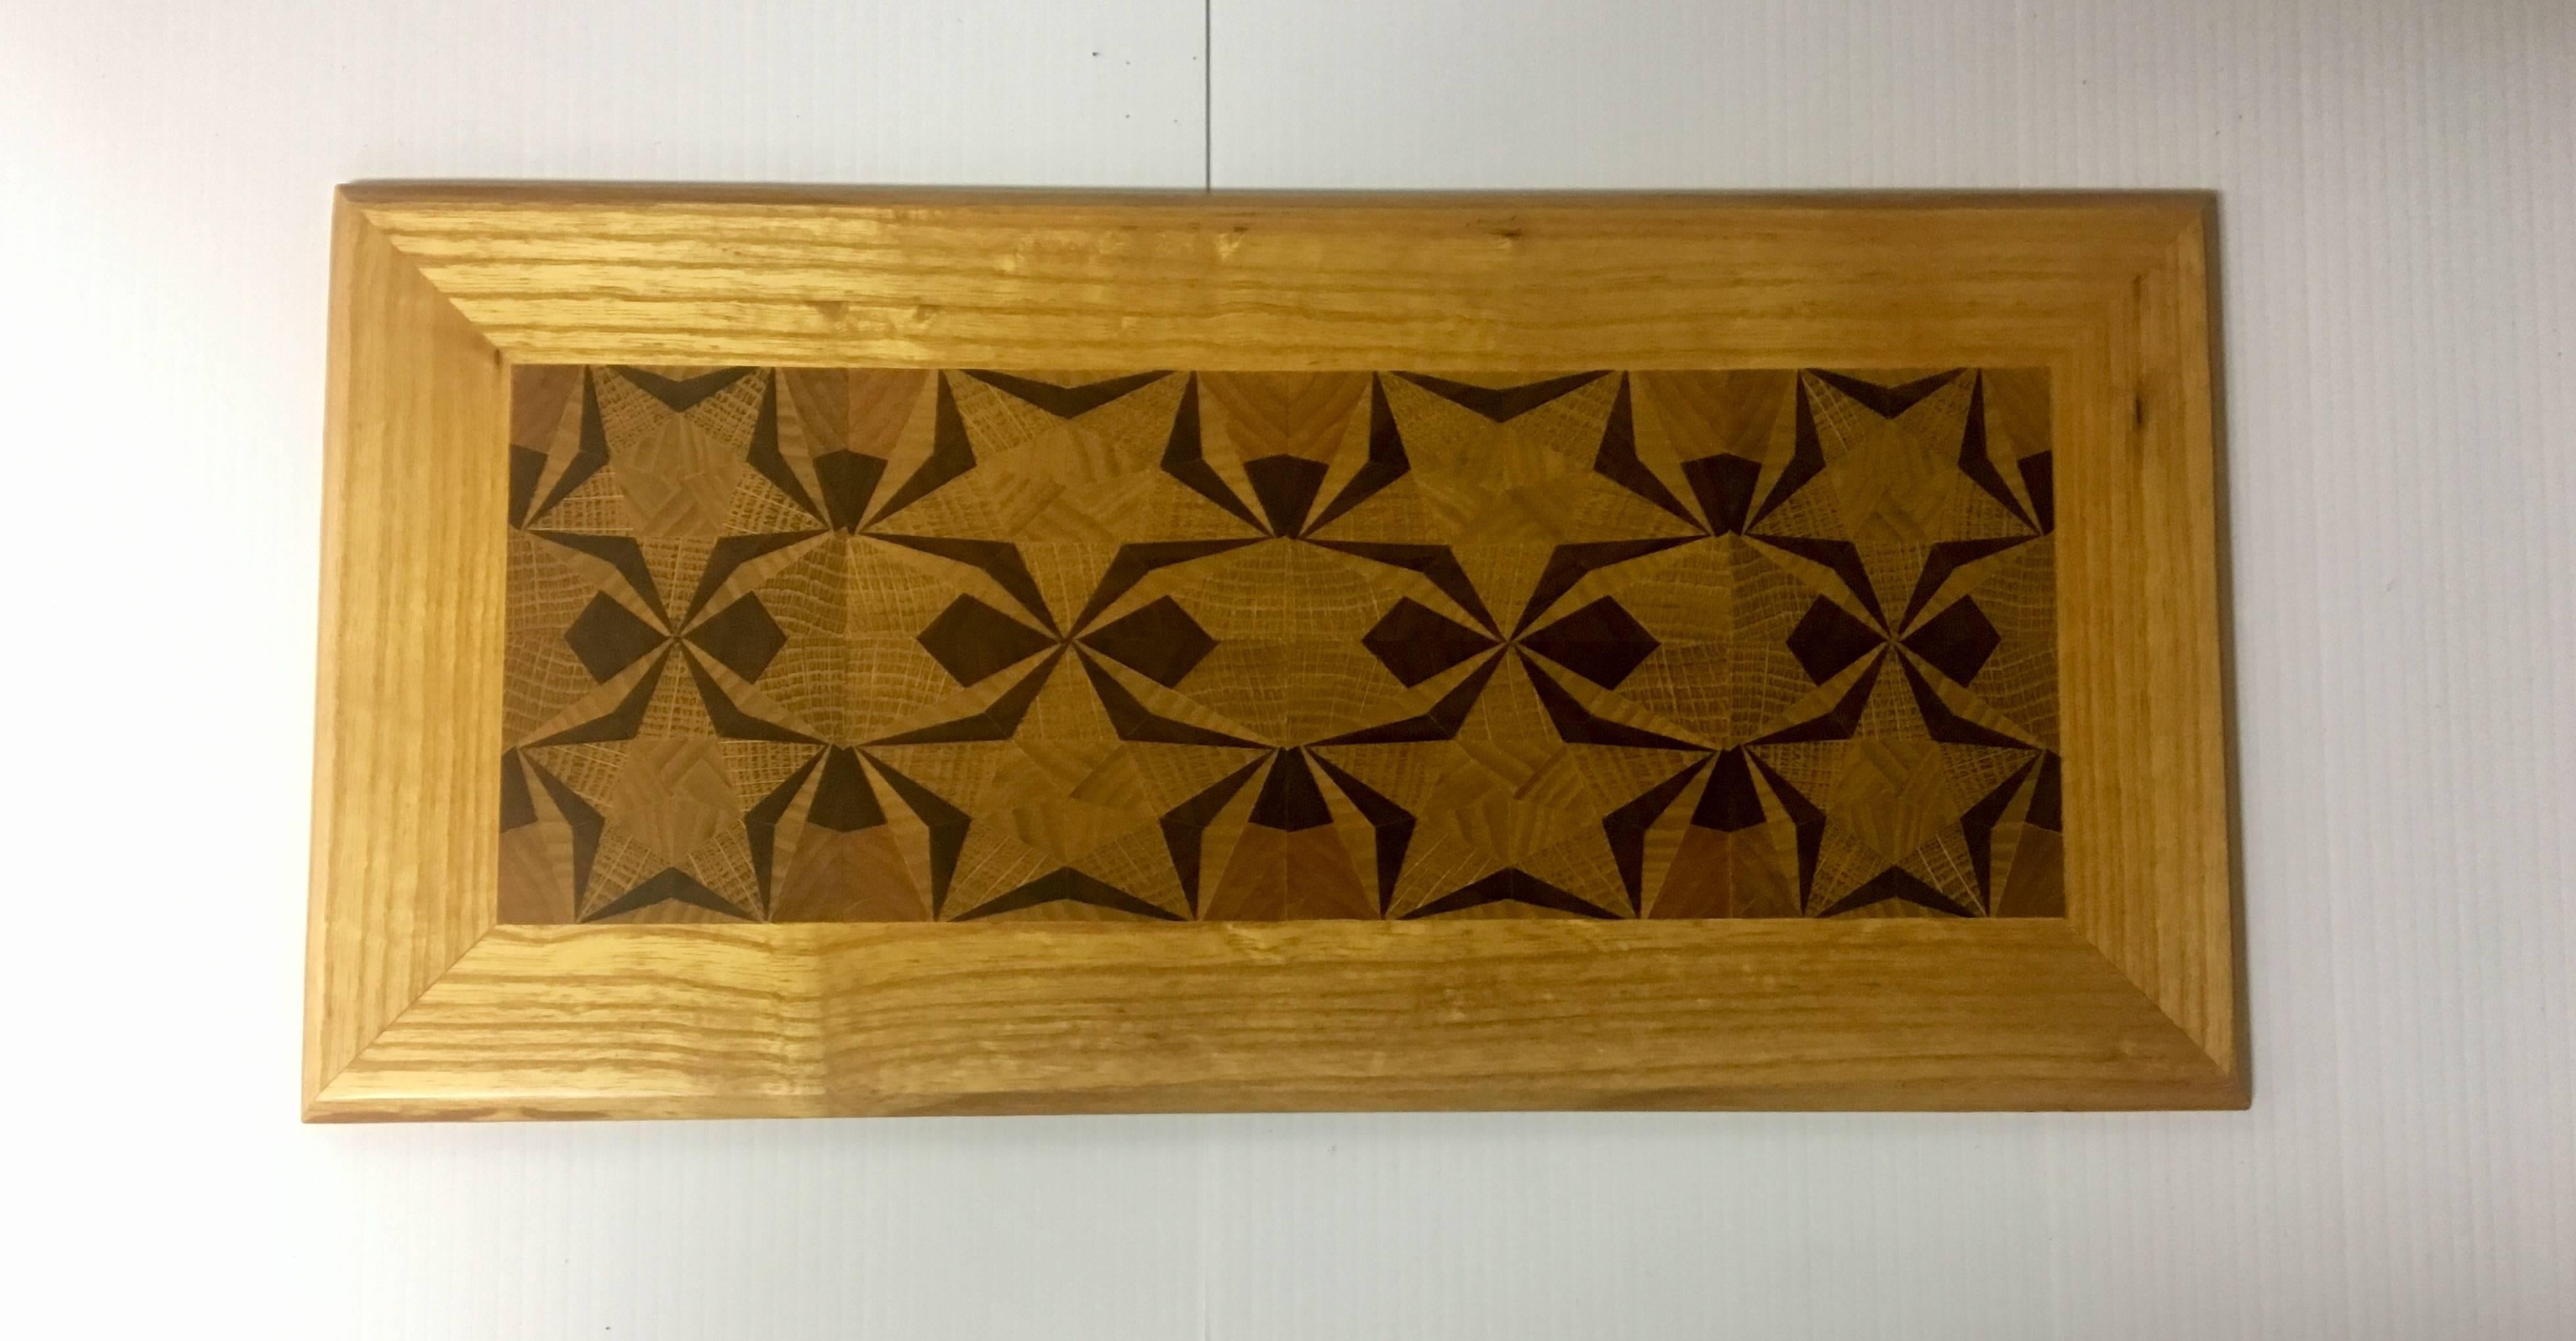 Incredible handcrafted wood work on this small wall plaque, circa 1970s. The piece is in excellent condition and has a nice geometric design.